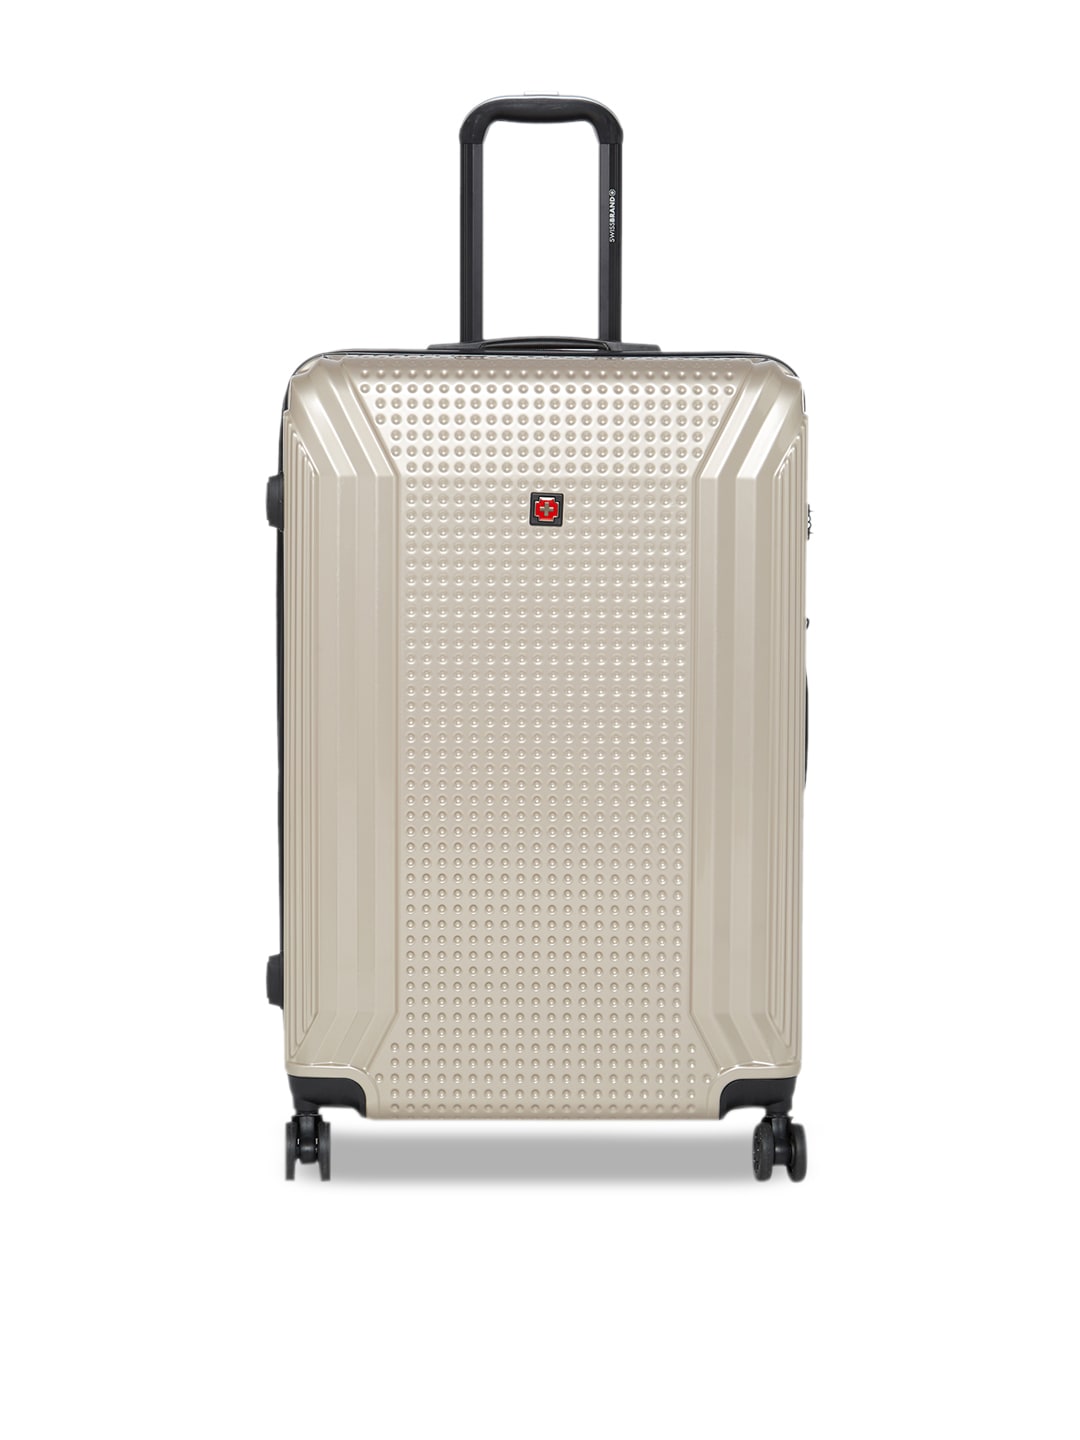 SWISS BRAND Unisex Beige Textured VERNIER 360-Degree Rotation Hard-Sided Large Trolley Suitcase Price in India